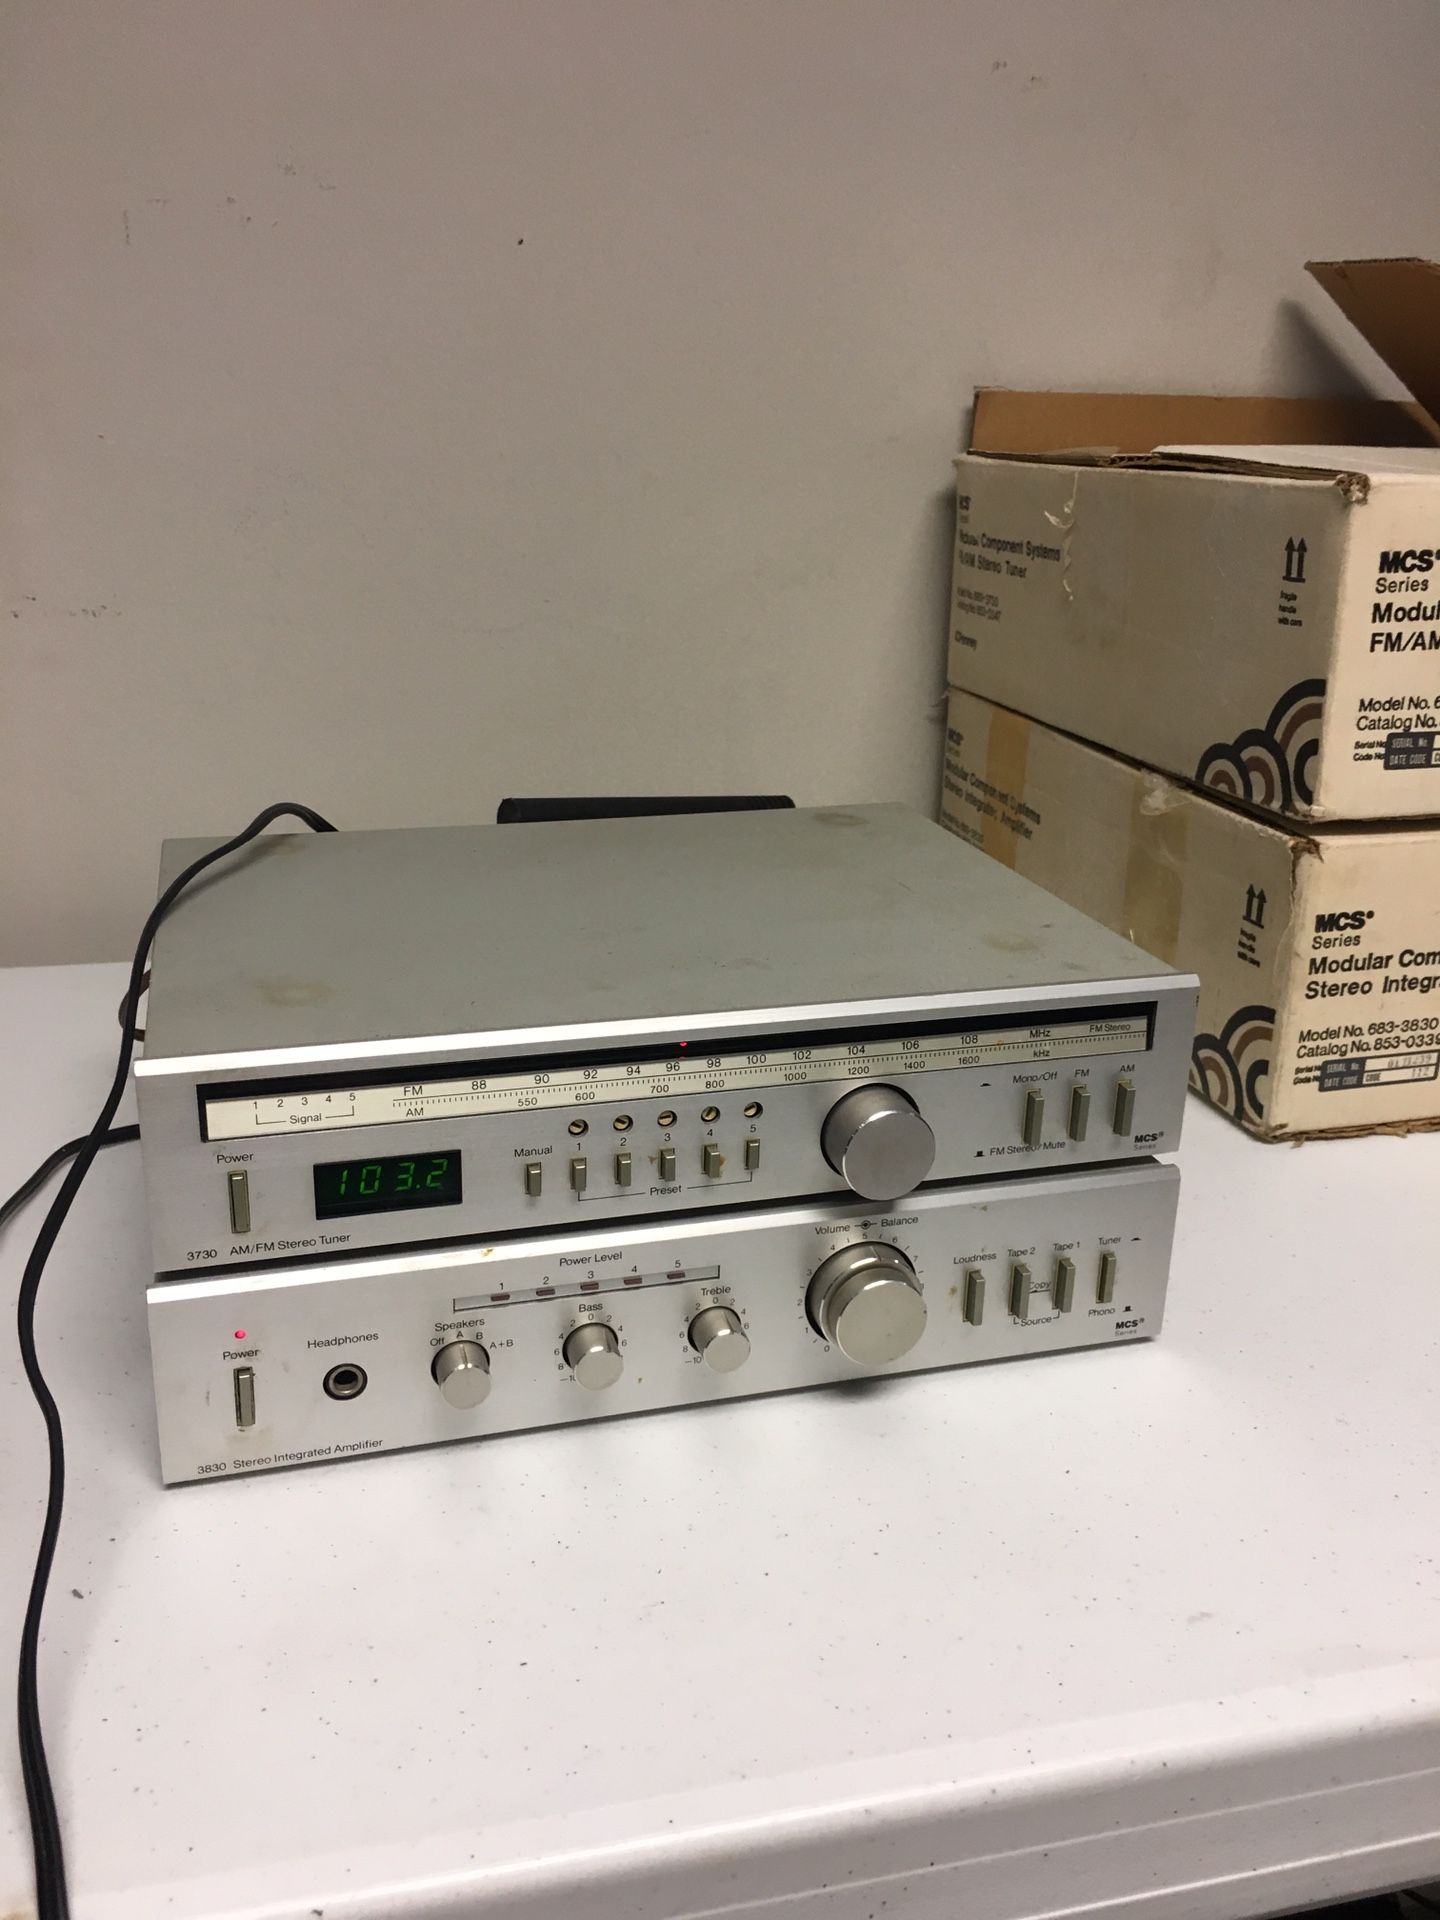 Awesome set!! MCS series vintage stereo amplifier and Fm/am tuner -made in Japan